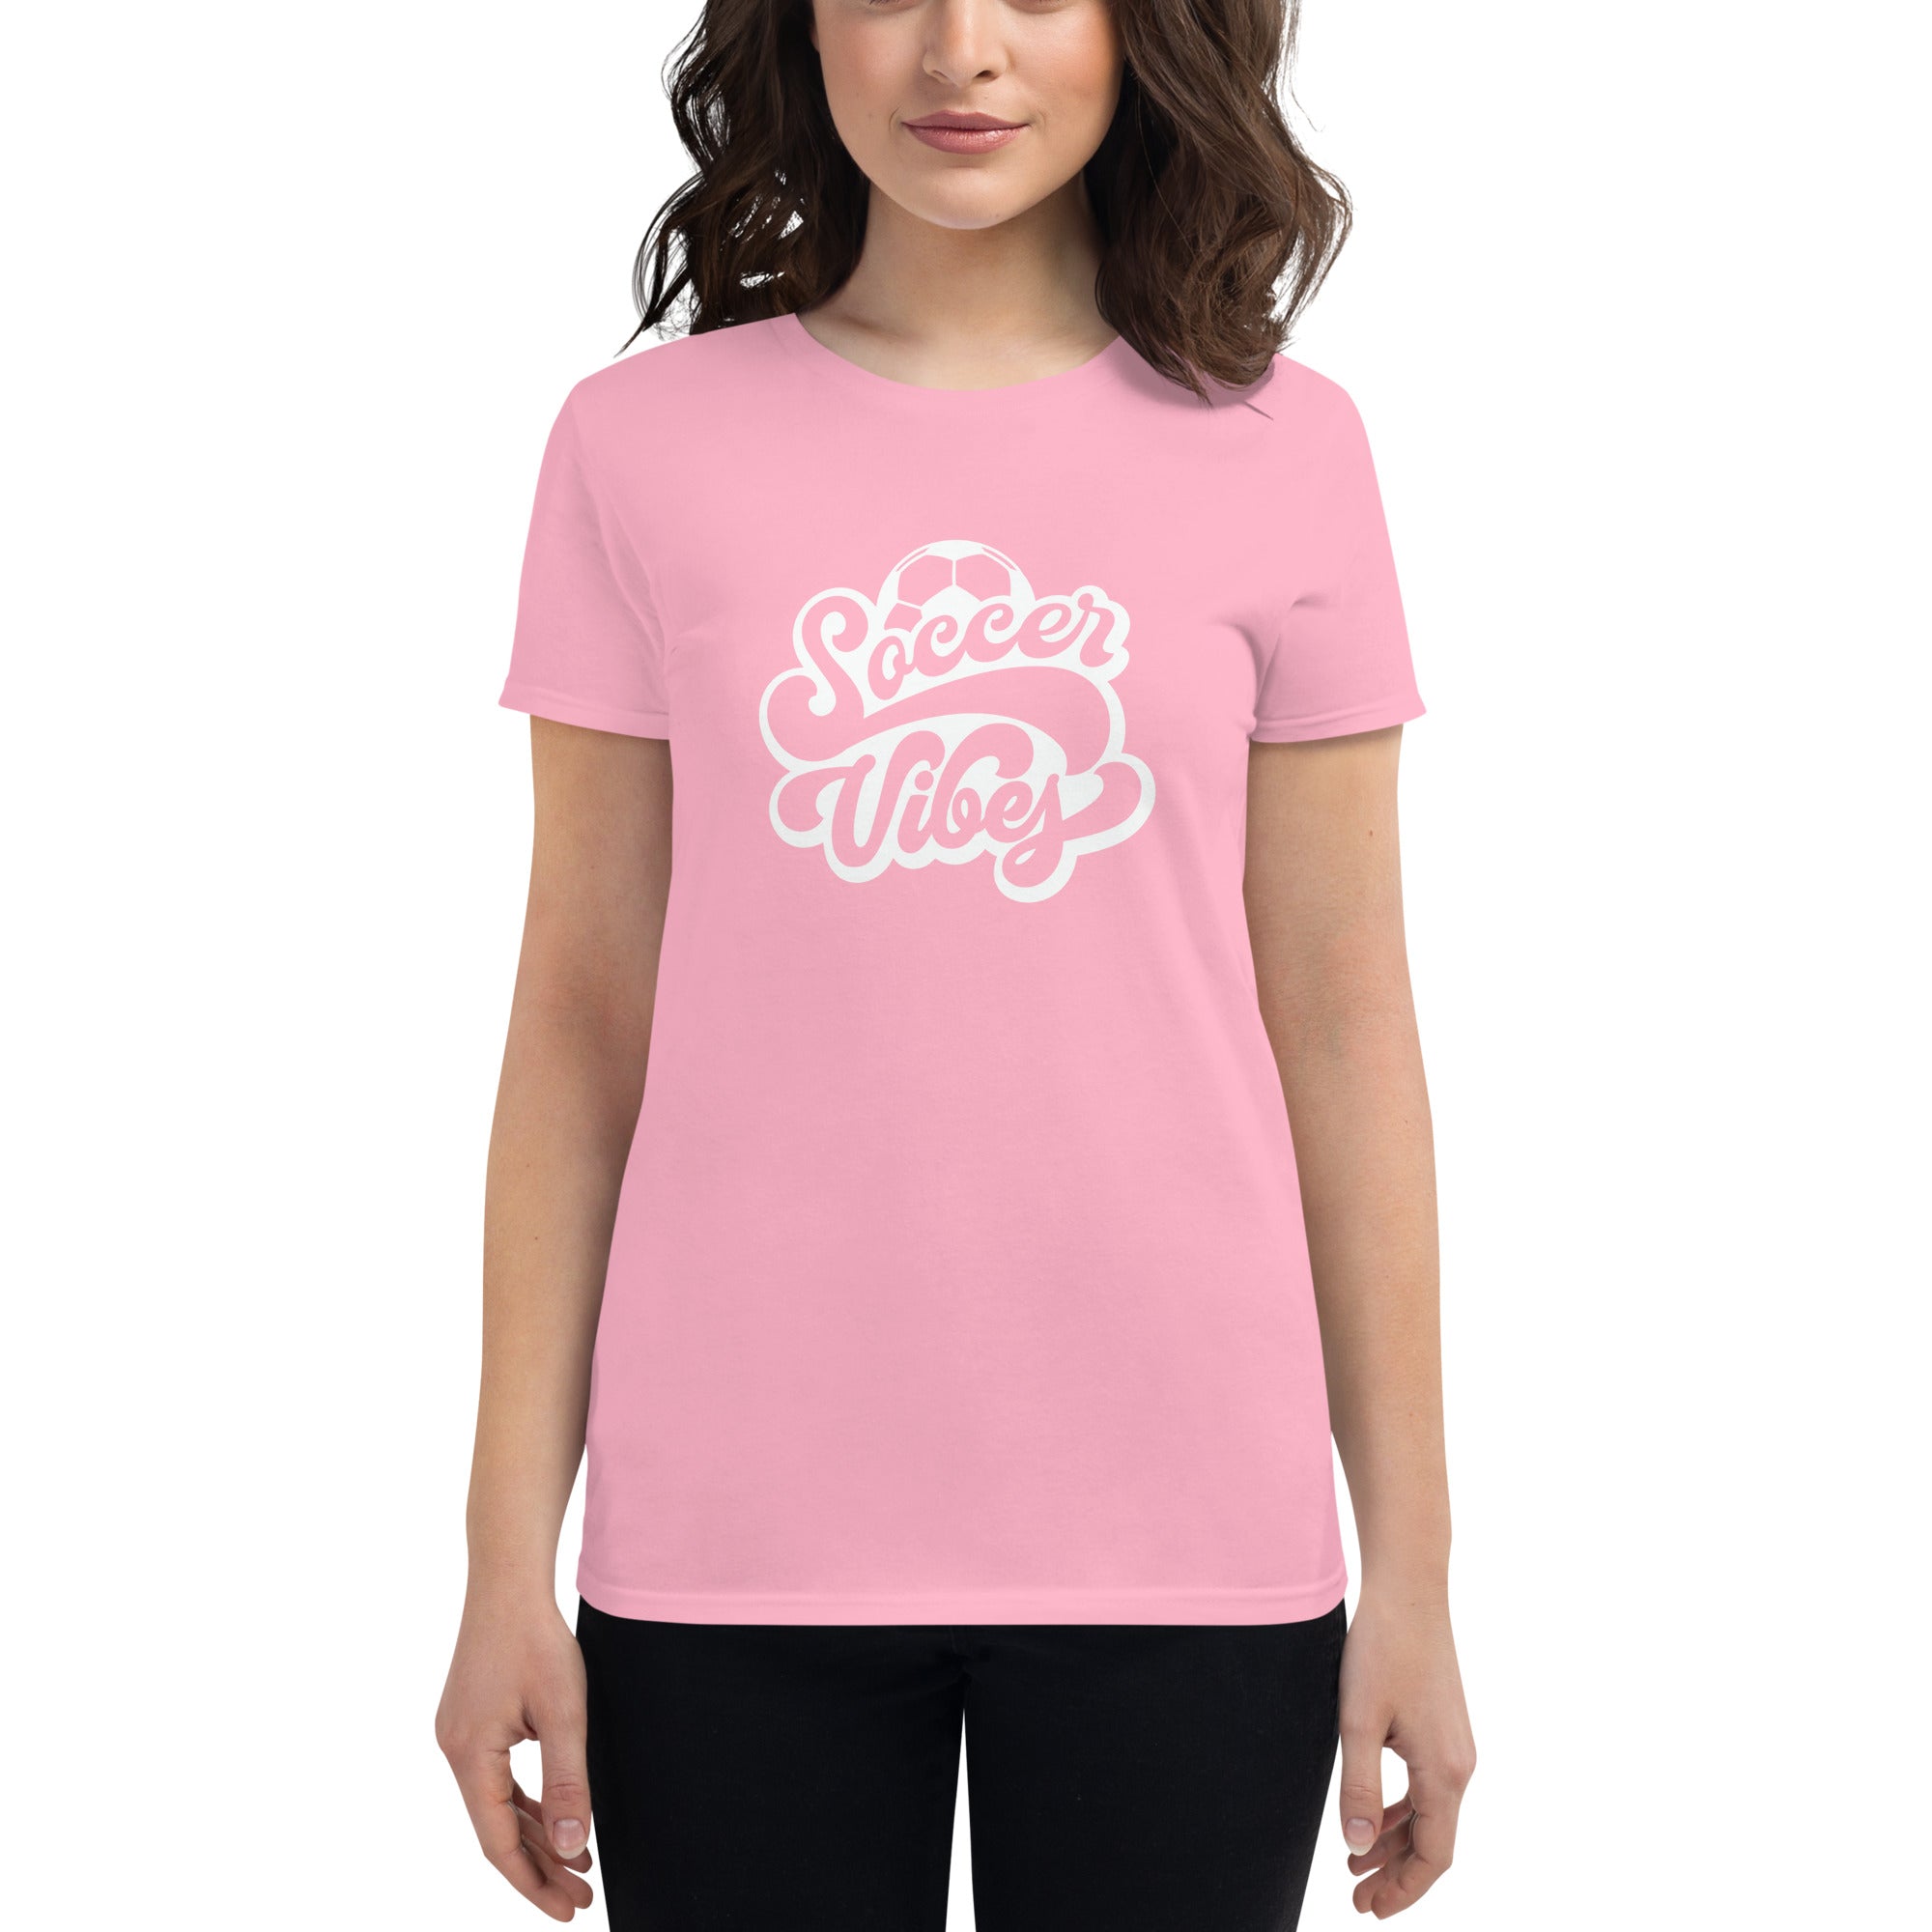 Soccer Vibes Women's Fitted T-Shirt